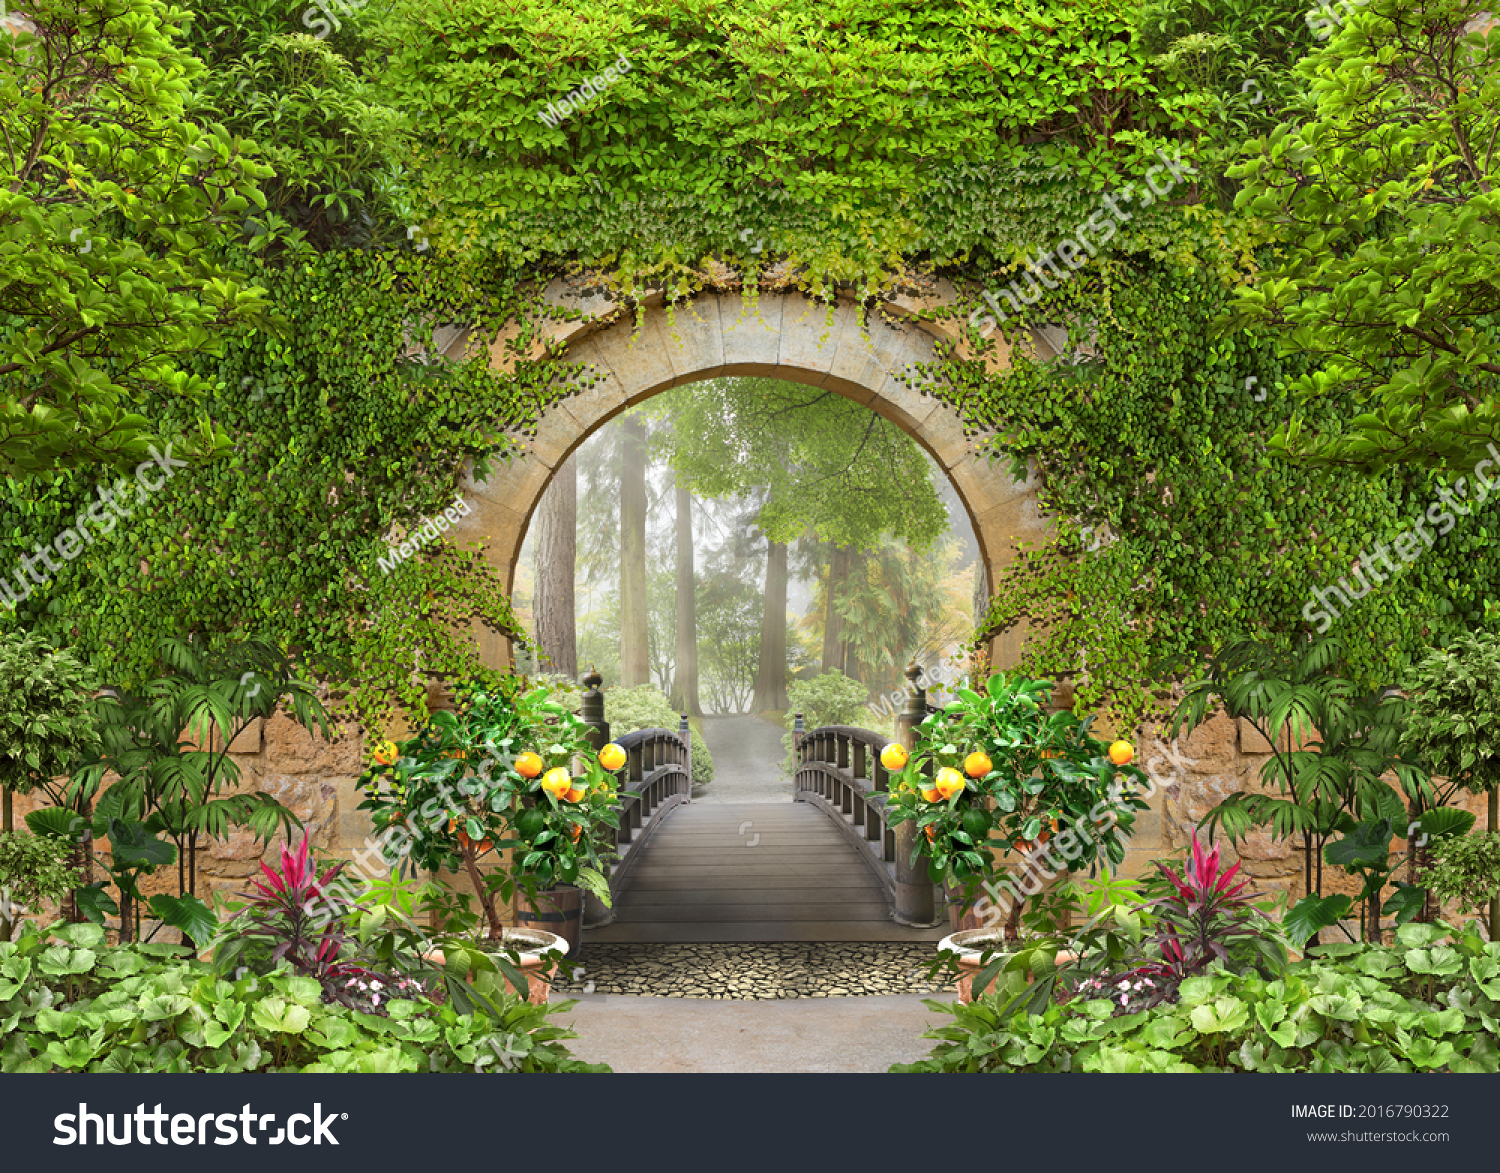 Passage to the summer sunny park through the arch with flowers #2016790322